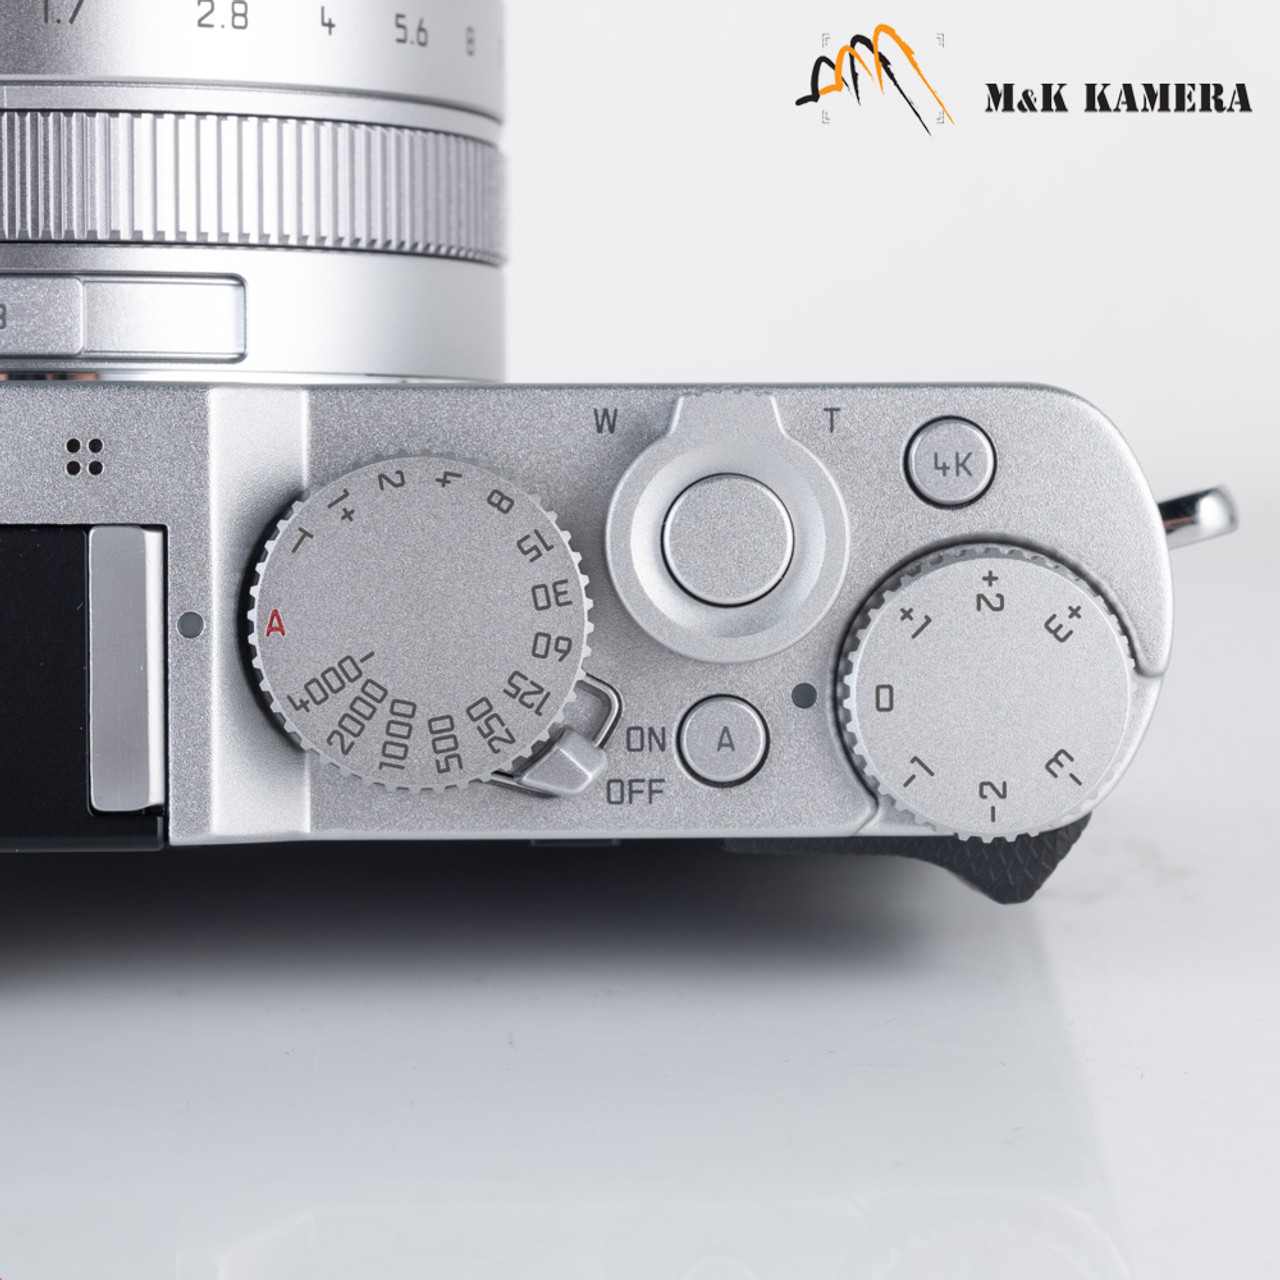 Leica D-Lux 7 Digital Camera, Silver {17MP} with CF D Flash (19116) at KEH  Camera